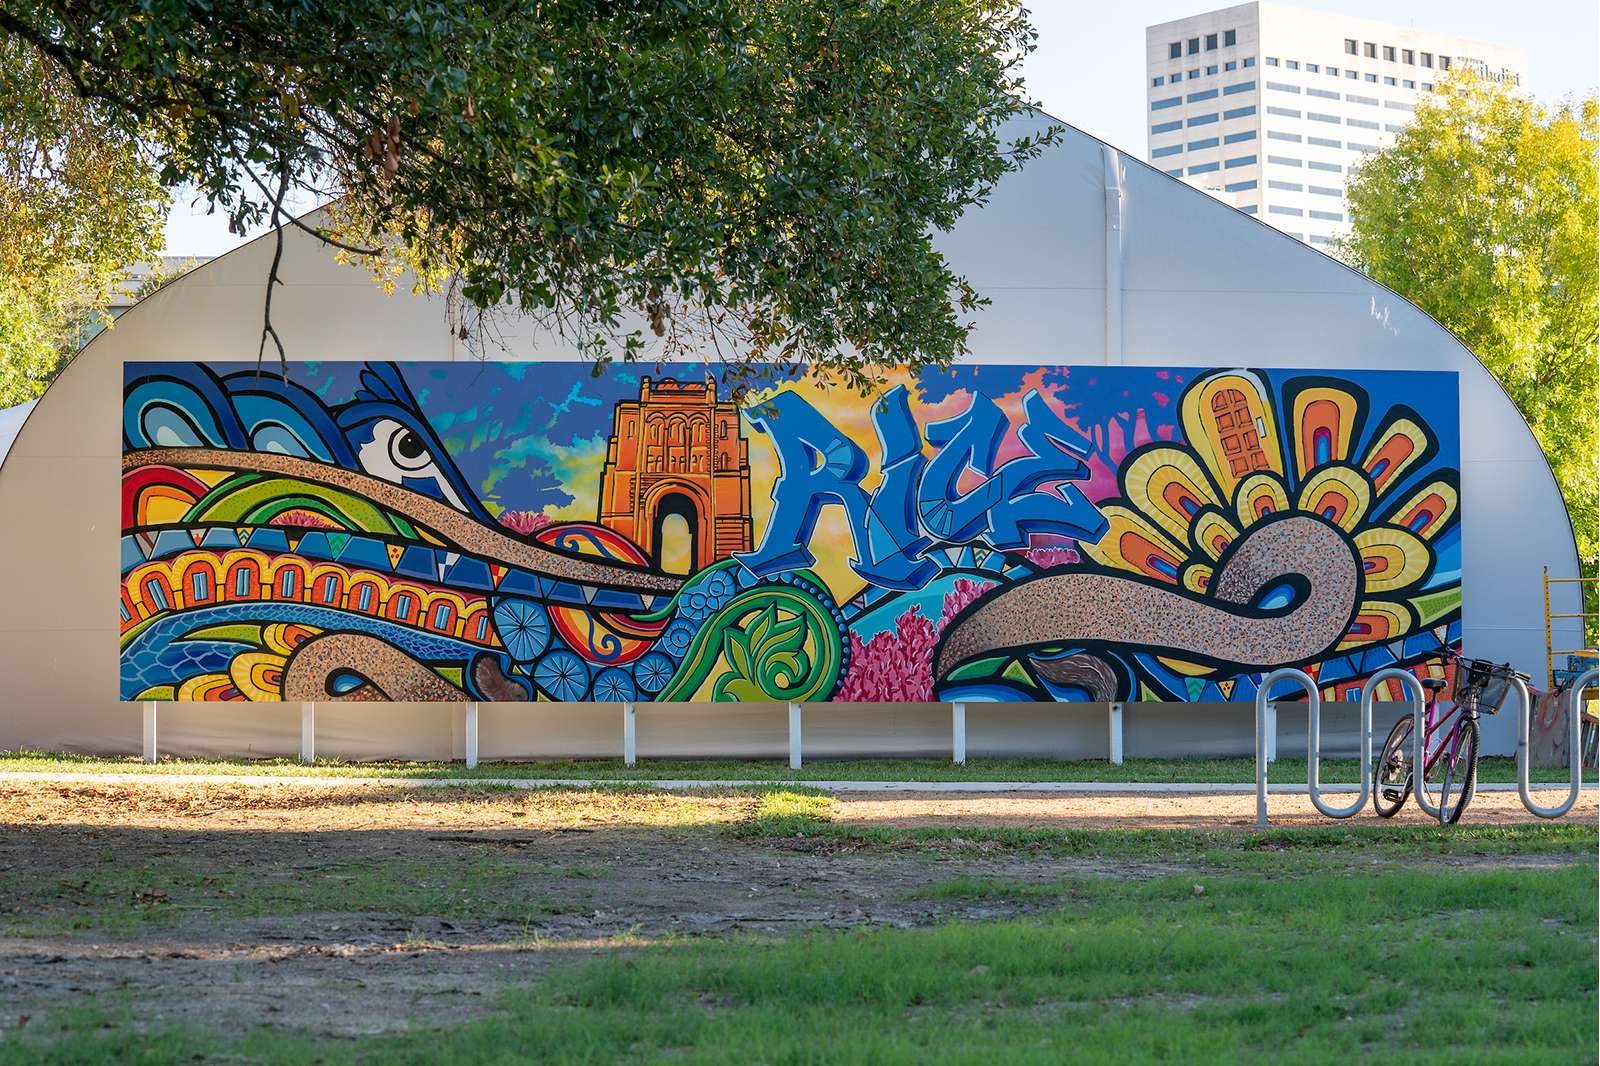 Mural by Gonzo. Photo by Tommy LaVergne.